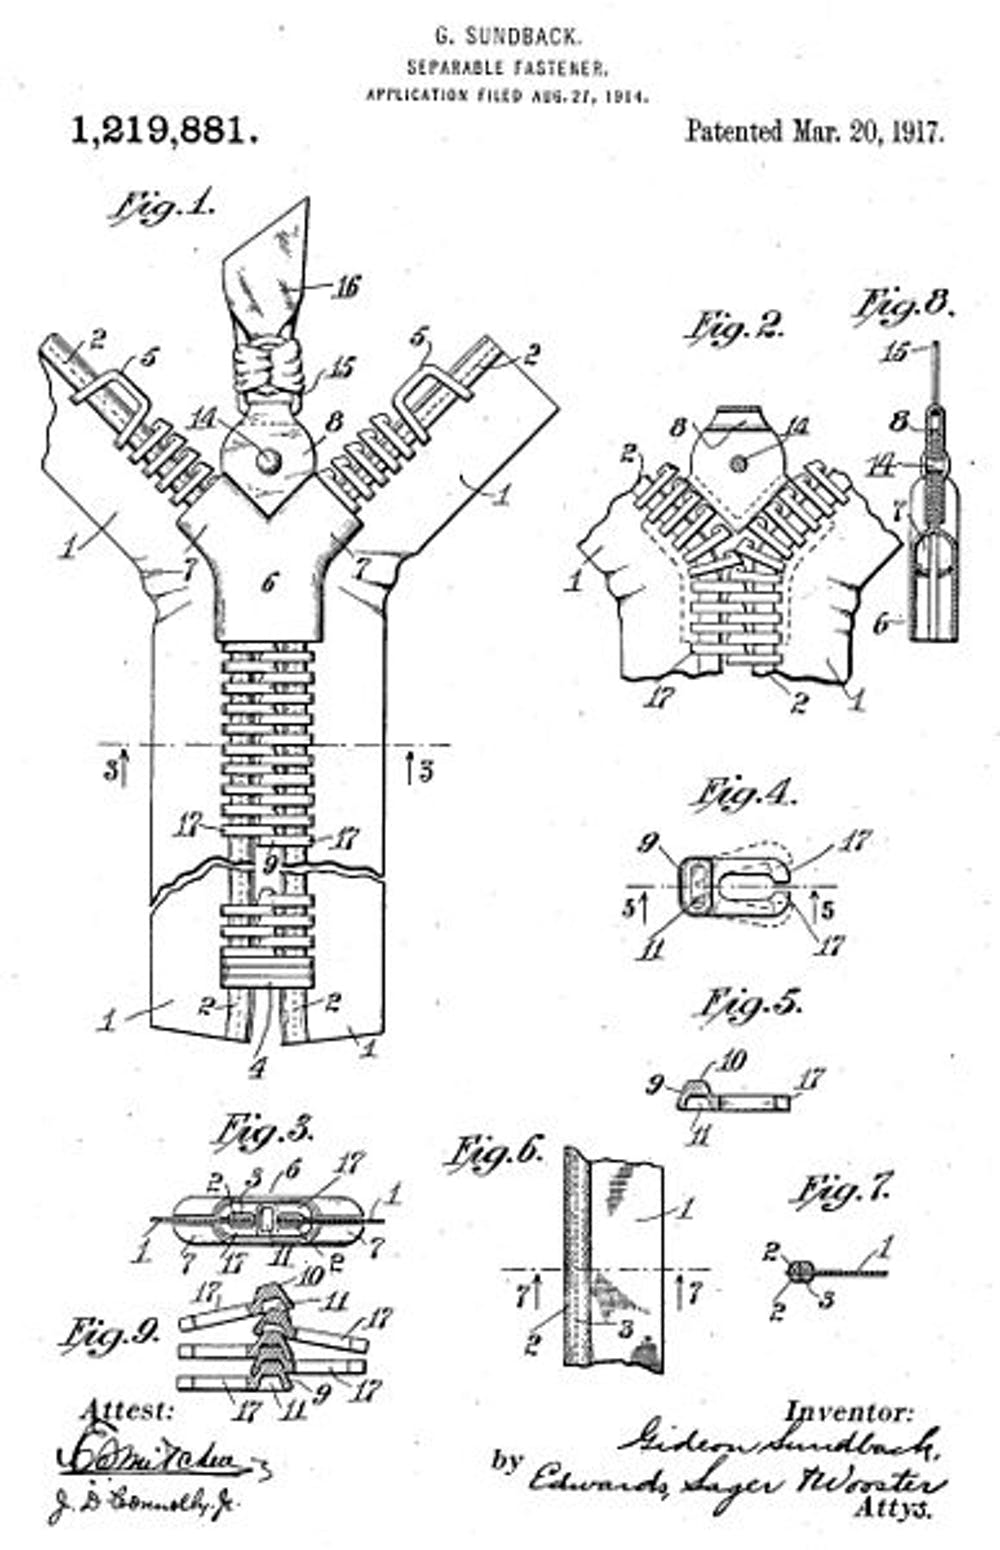 Black and white line drawing of a zipper design patented in 1917